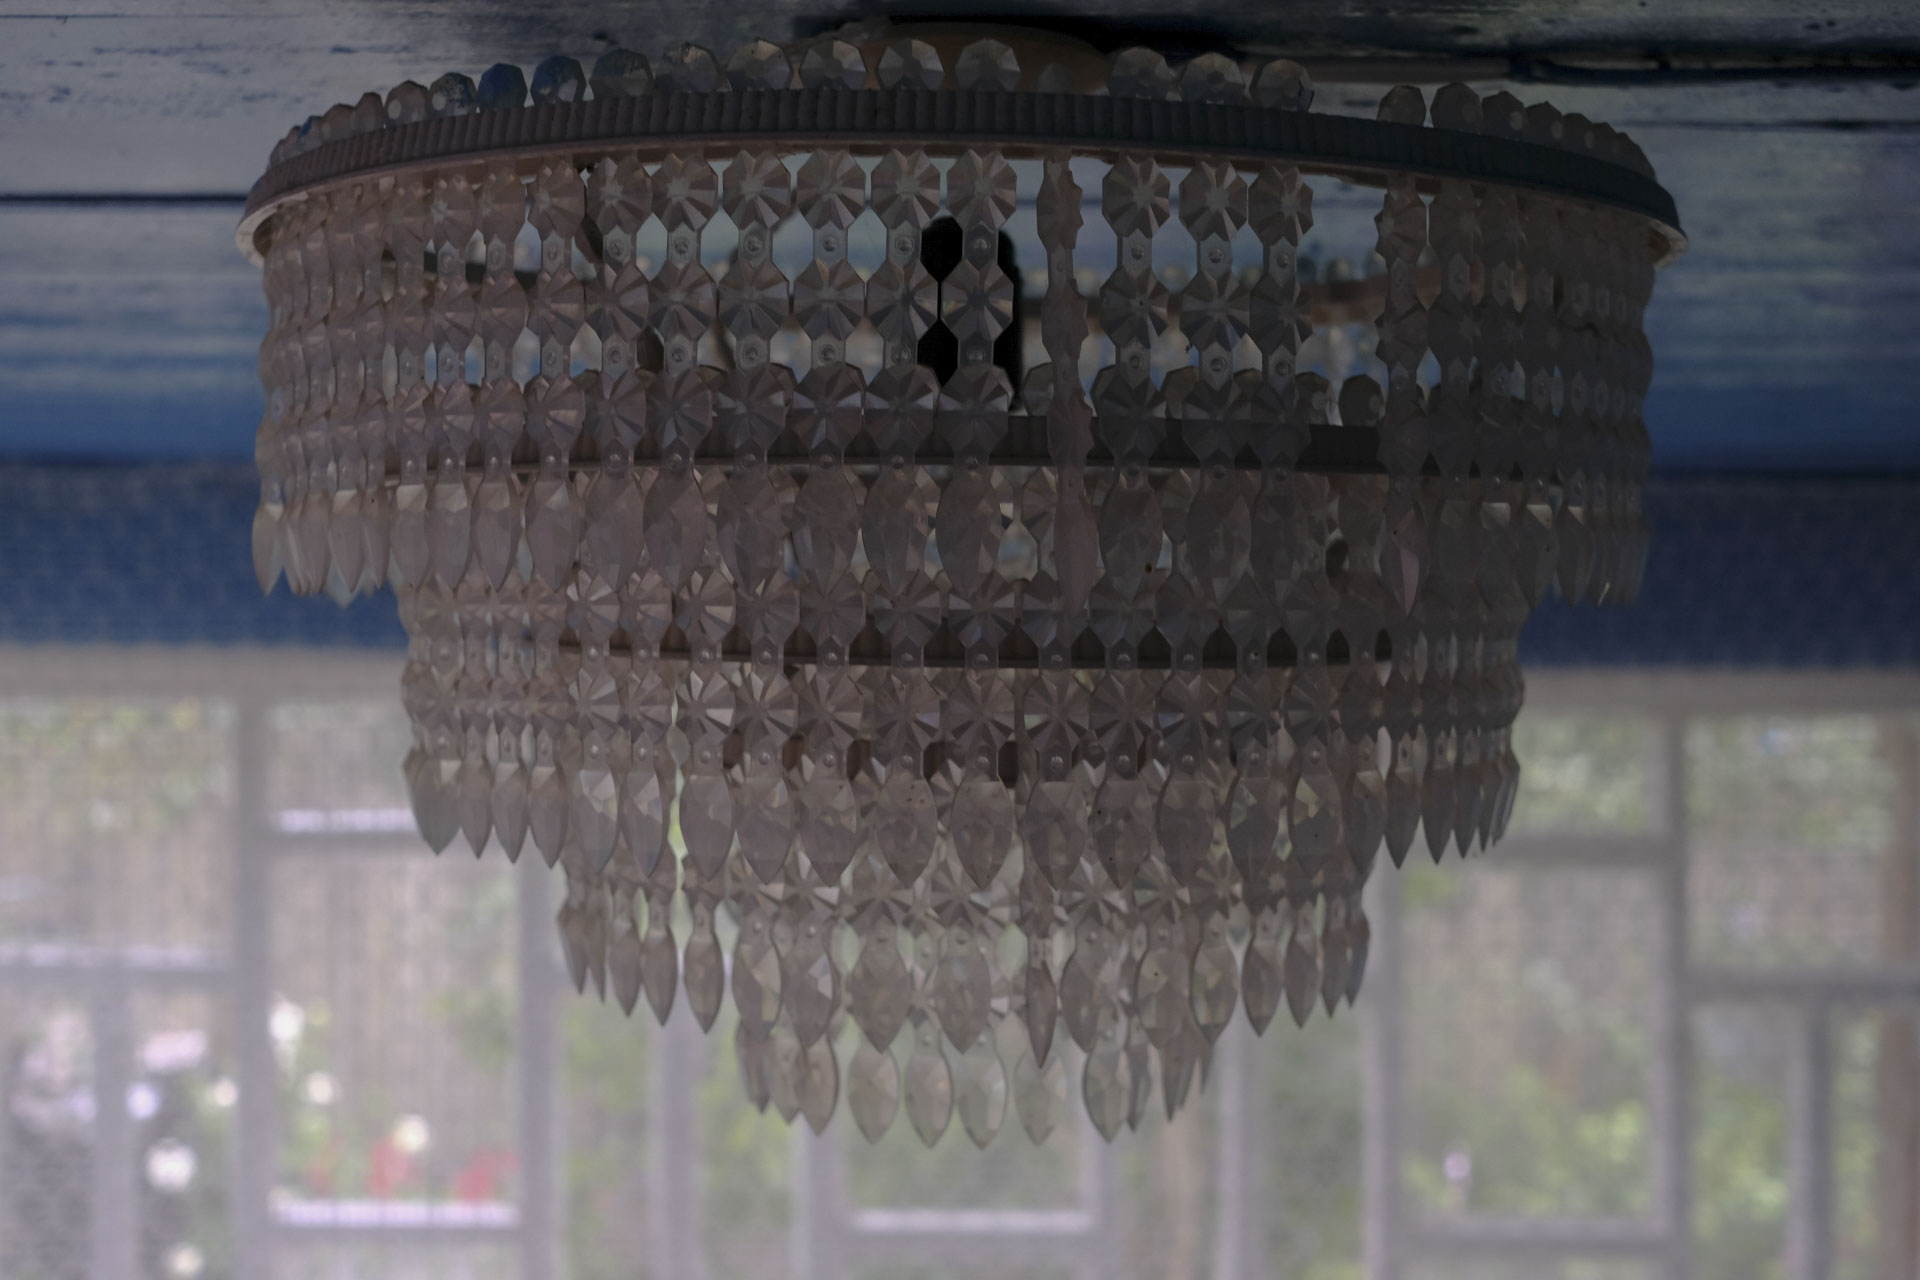 This chandelier has been in the summer room of the house since my grandparents lived in the house. Krasnopo-lye, Mogilev region, Belarus, 2020.